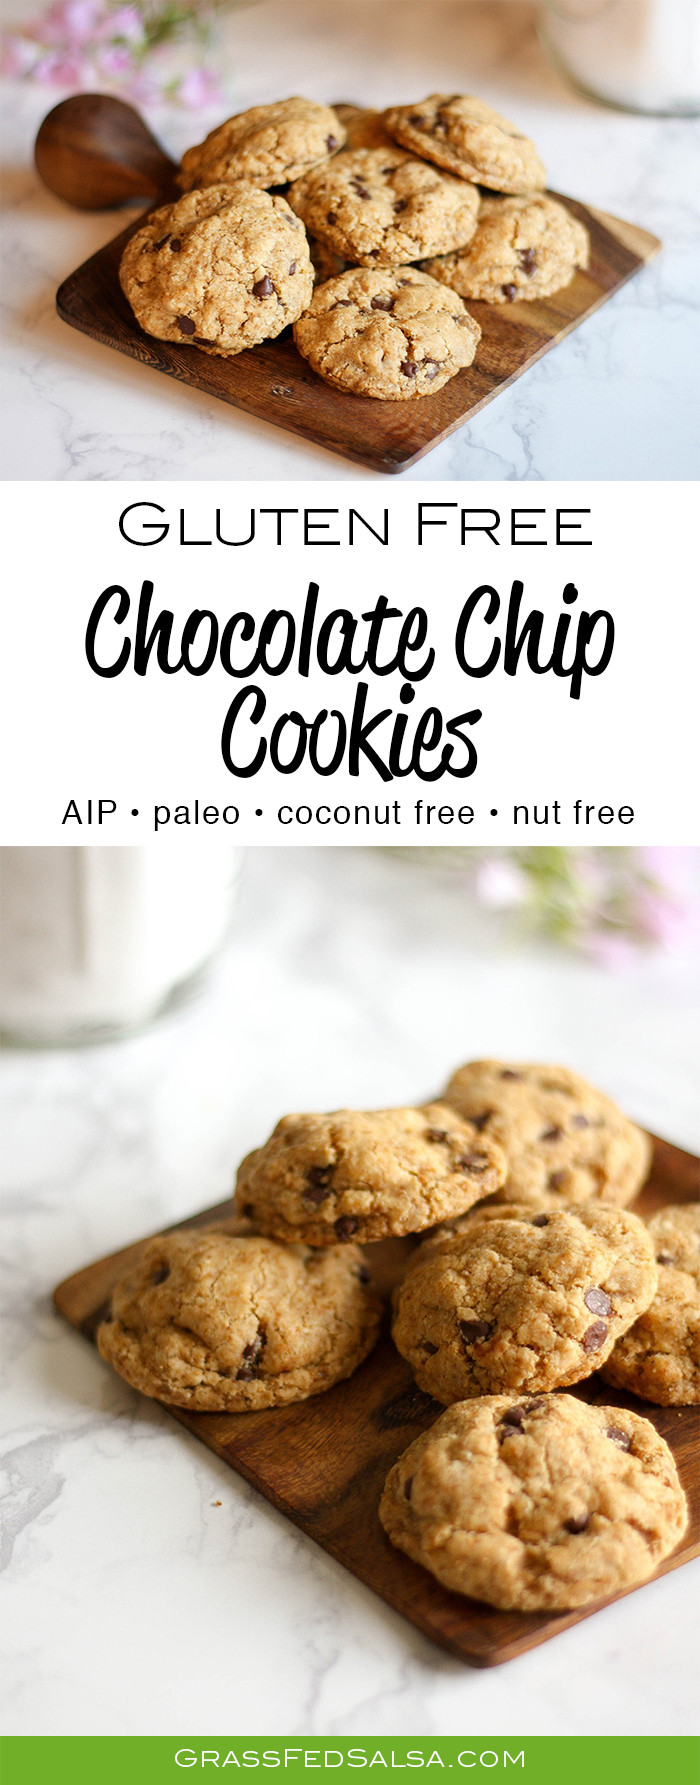 Dairy Free Chocolate Chip Cookies
 The Best Gluten Free Chocolate Chip Cookies AIP Paleo